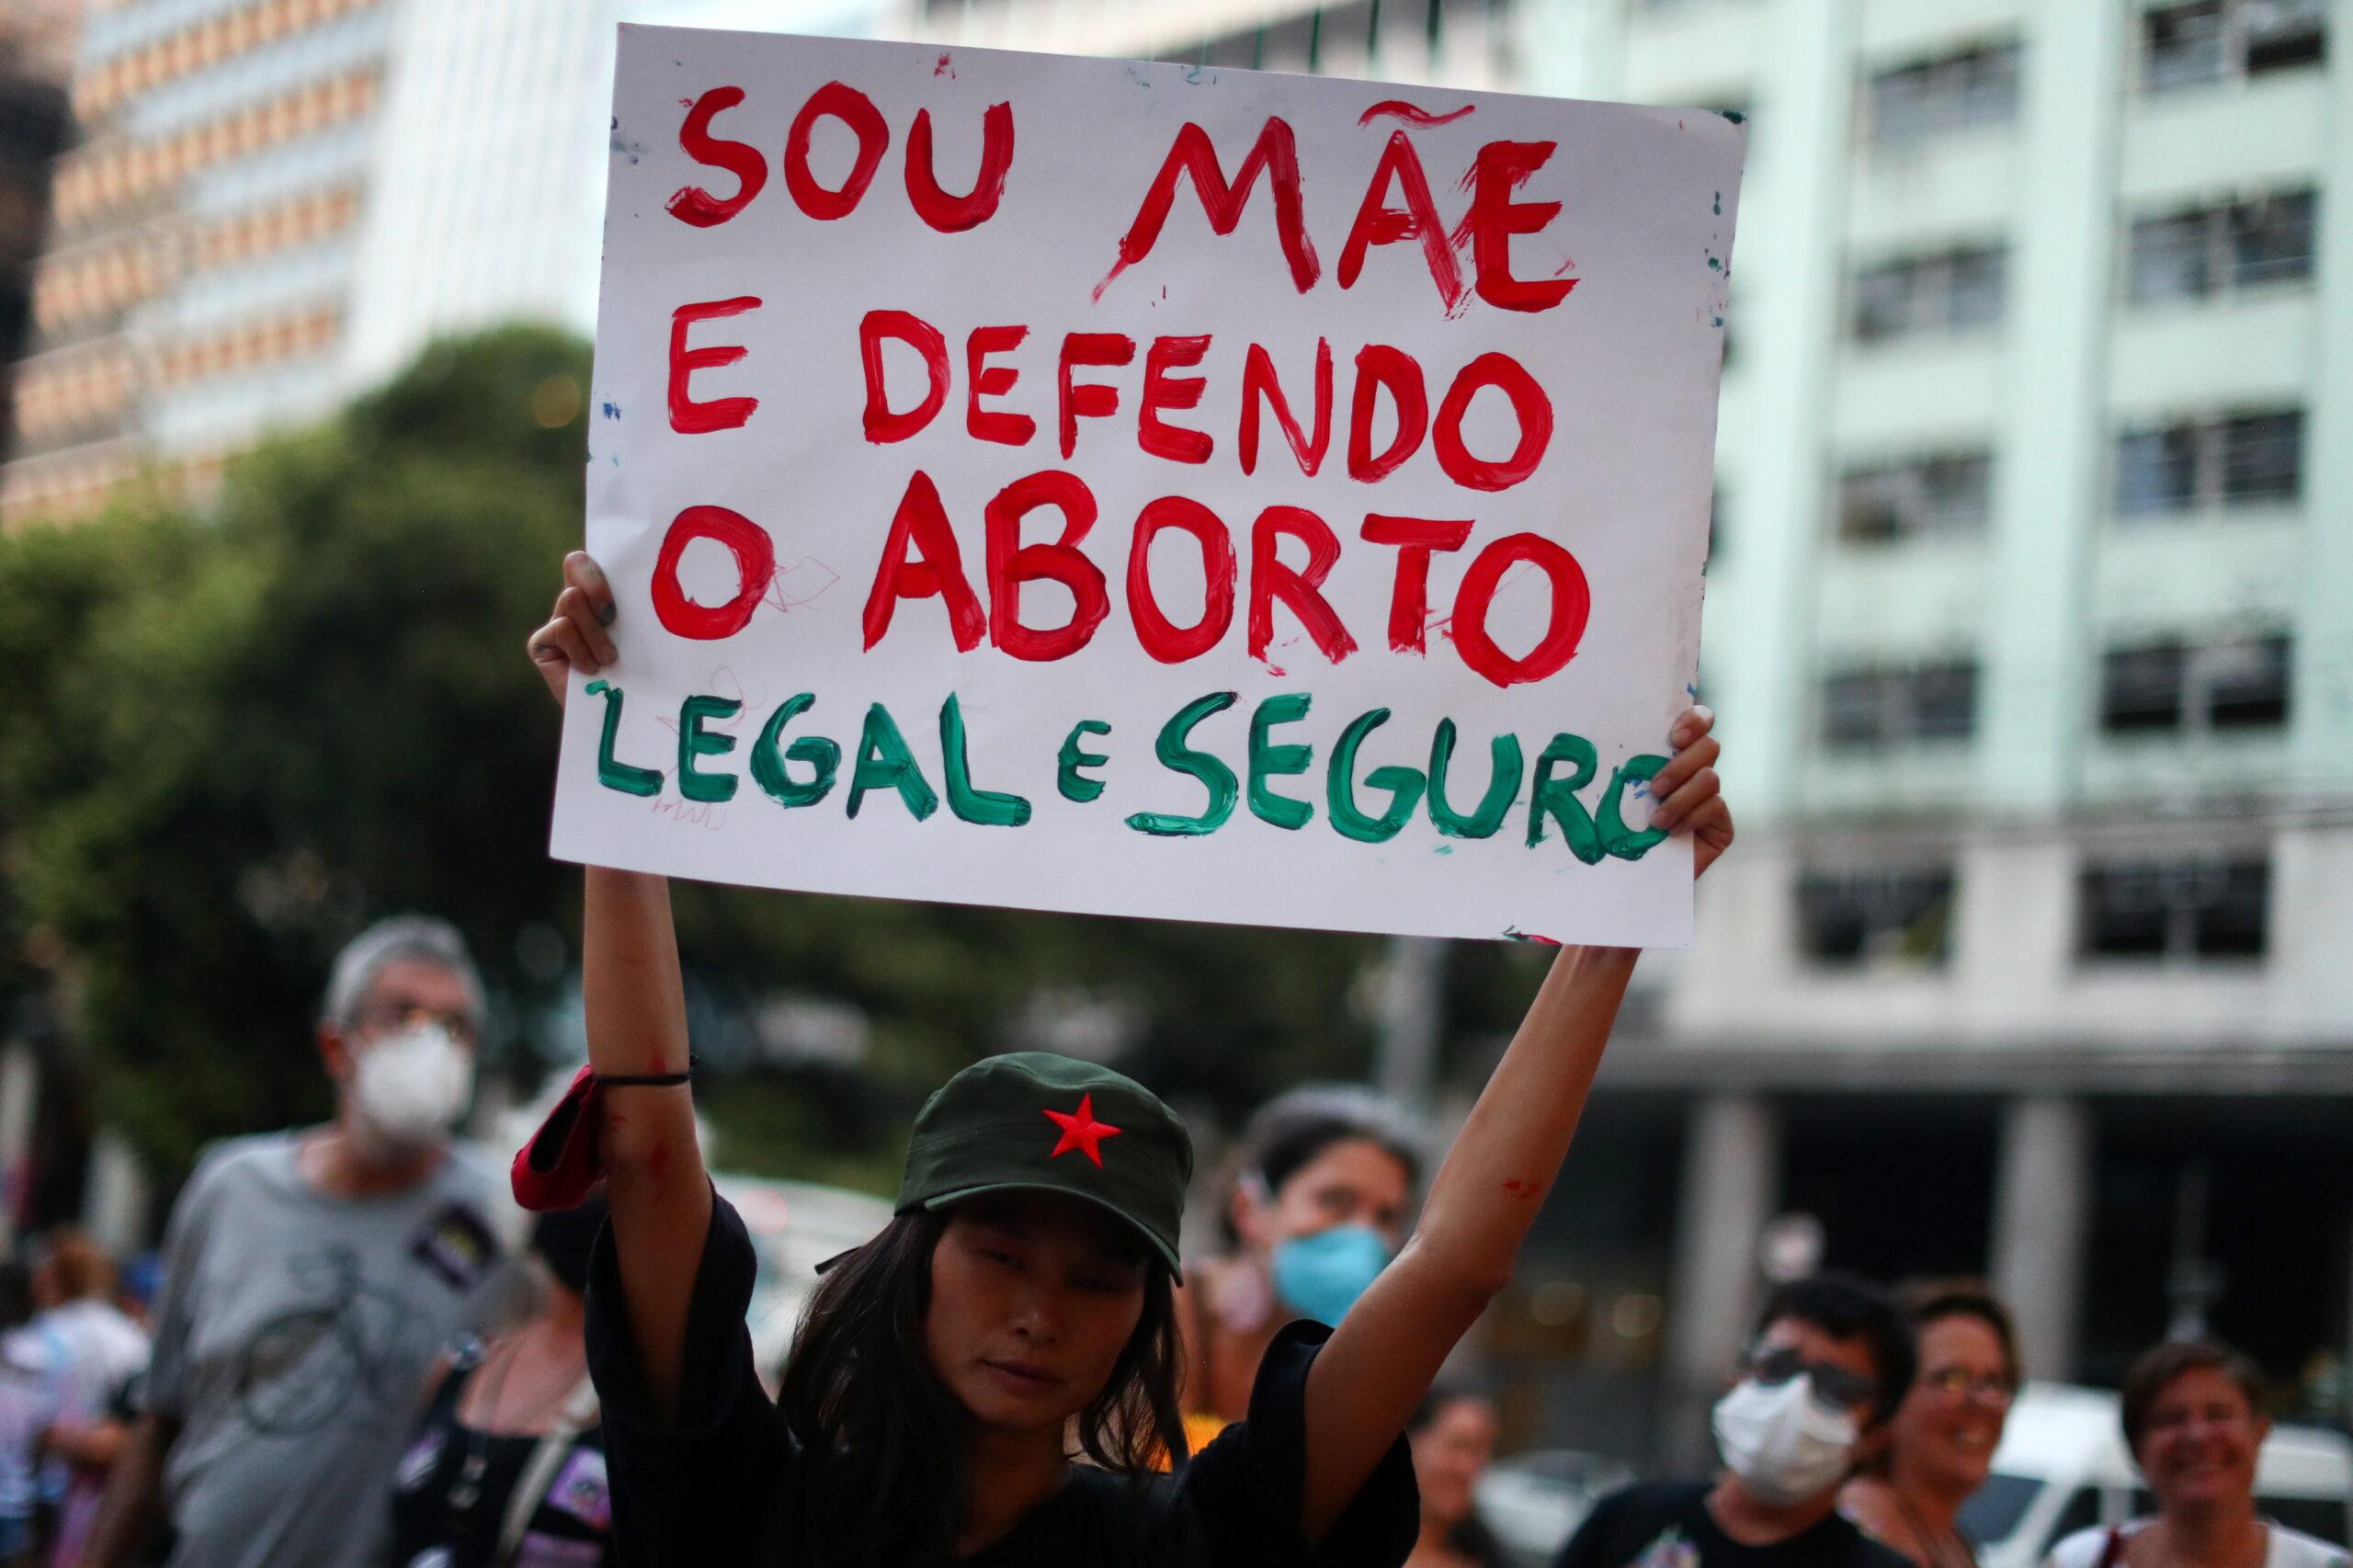 A woman holds a sign reading "I am a mother and I support legal and safe abortion" during a demonstration to mark International Women's Day, in Rio de Janeiro, Brazil, March 8, 2022.